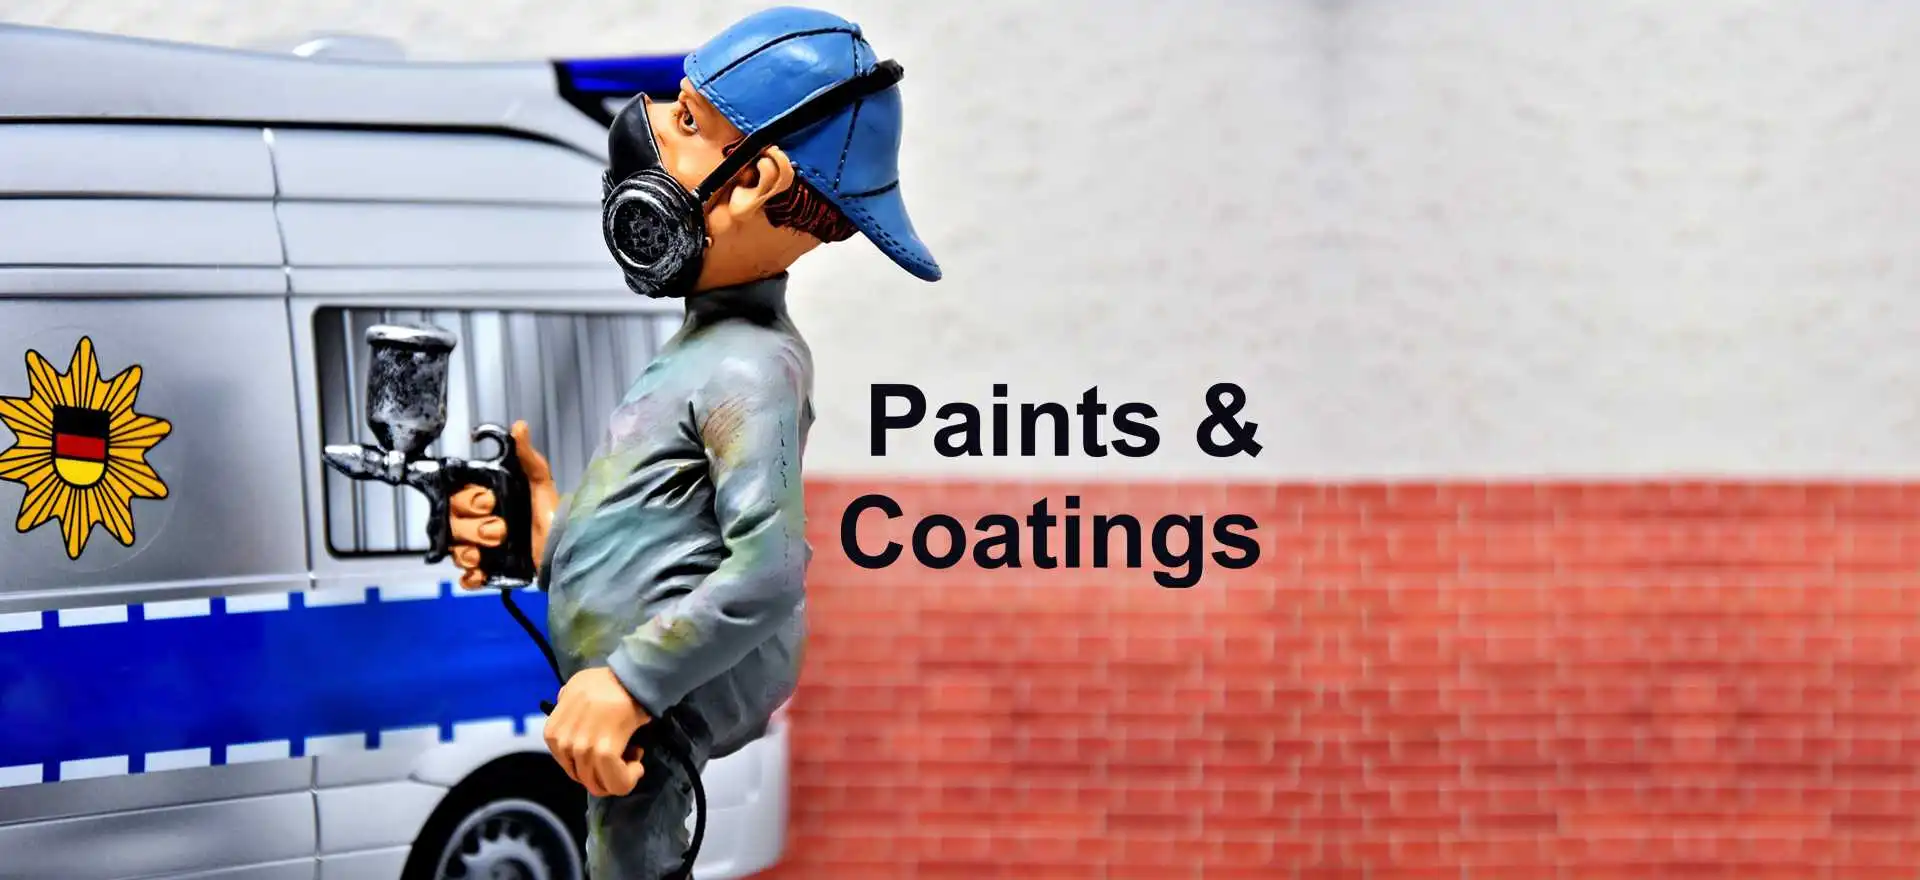 VOC free Paints and Coatings for toys